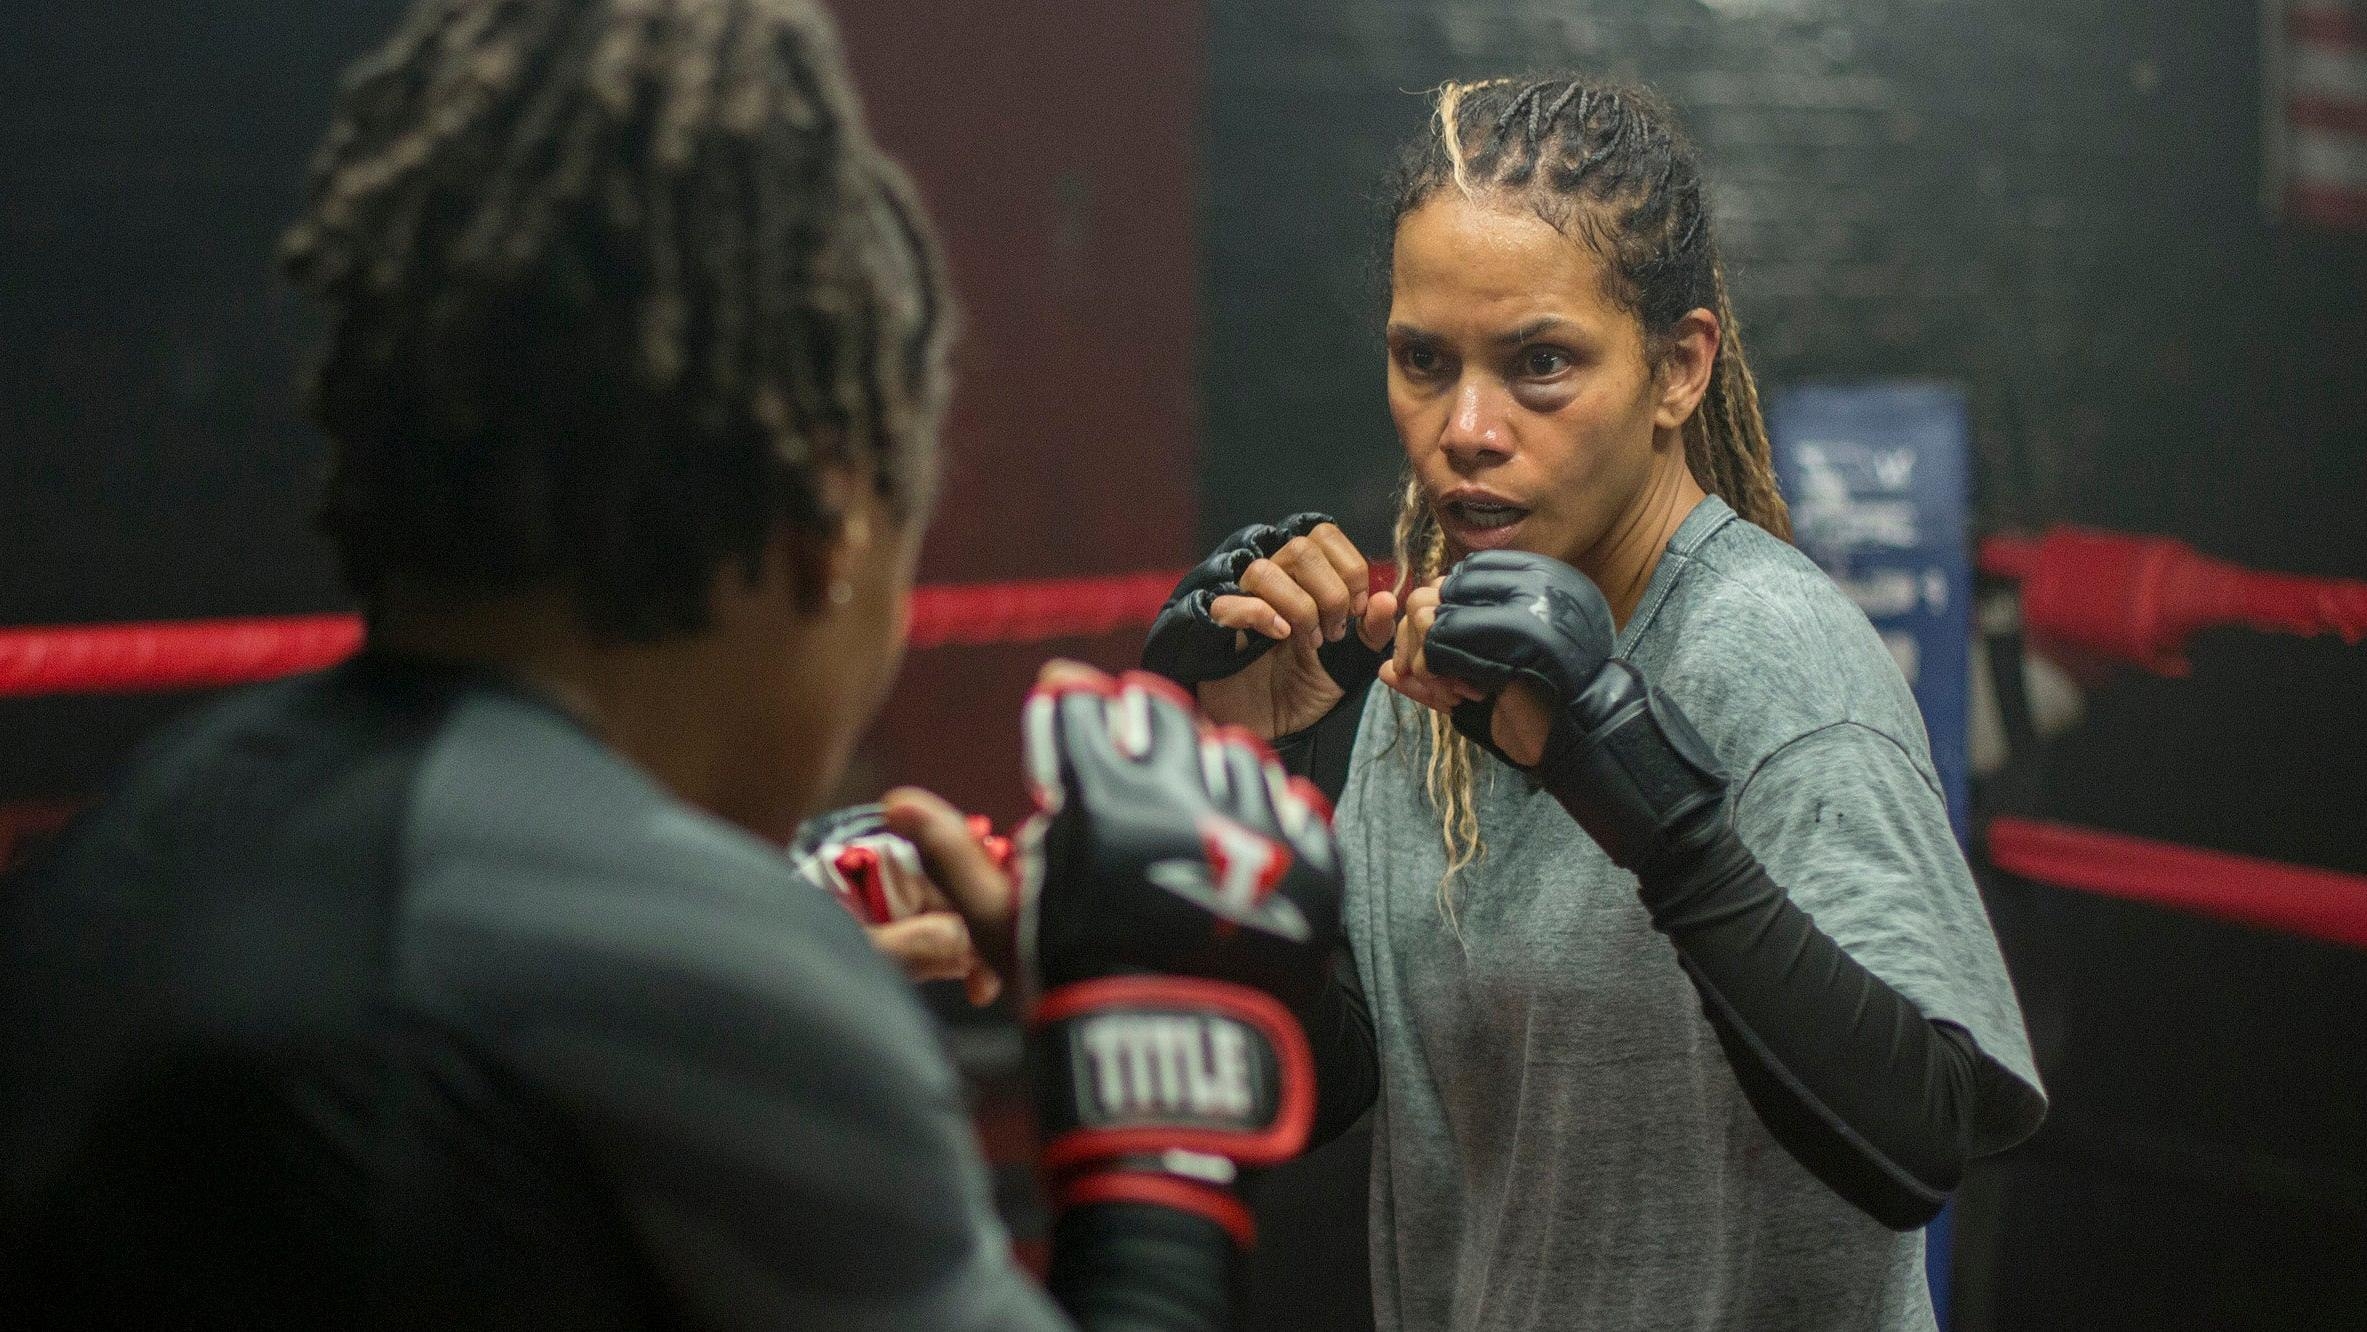 Halle Berry lands some big dramatic punches in her directorial debut, Bruised